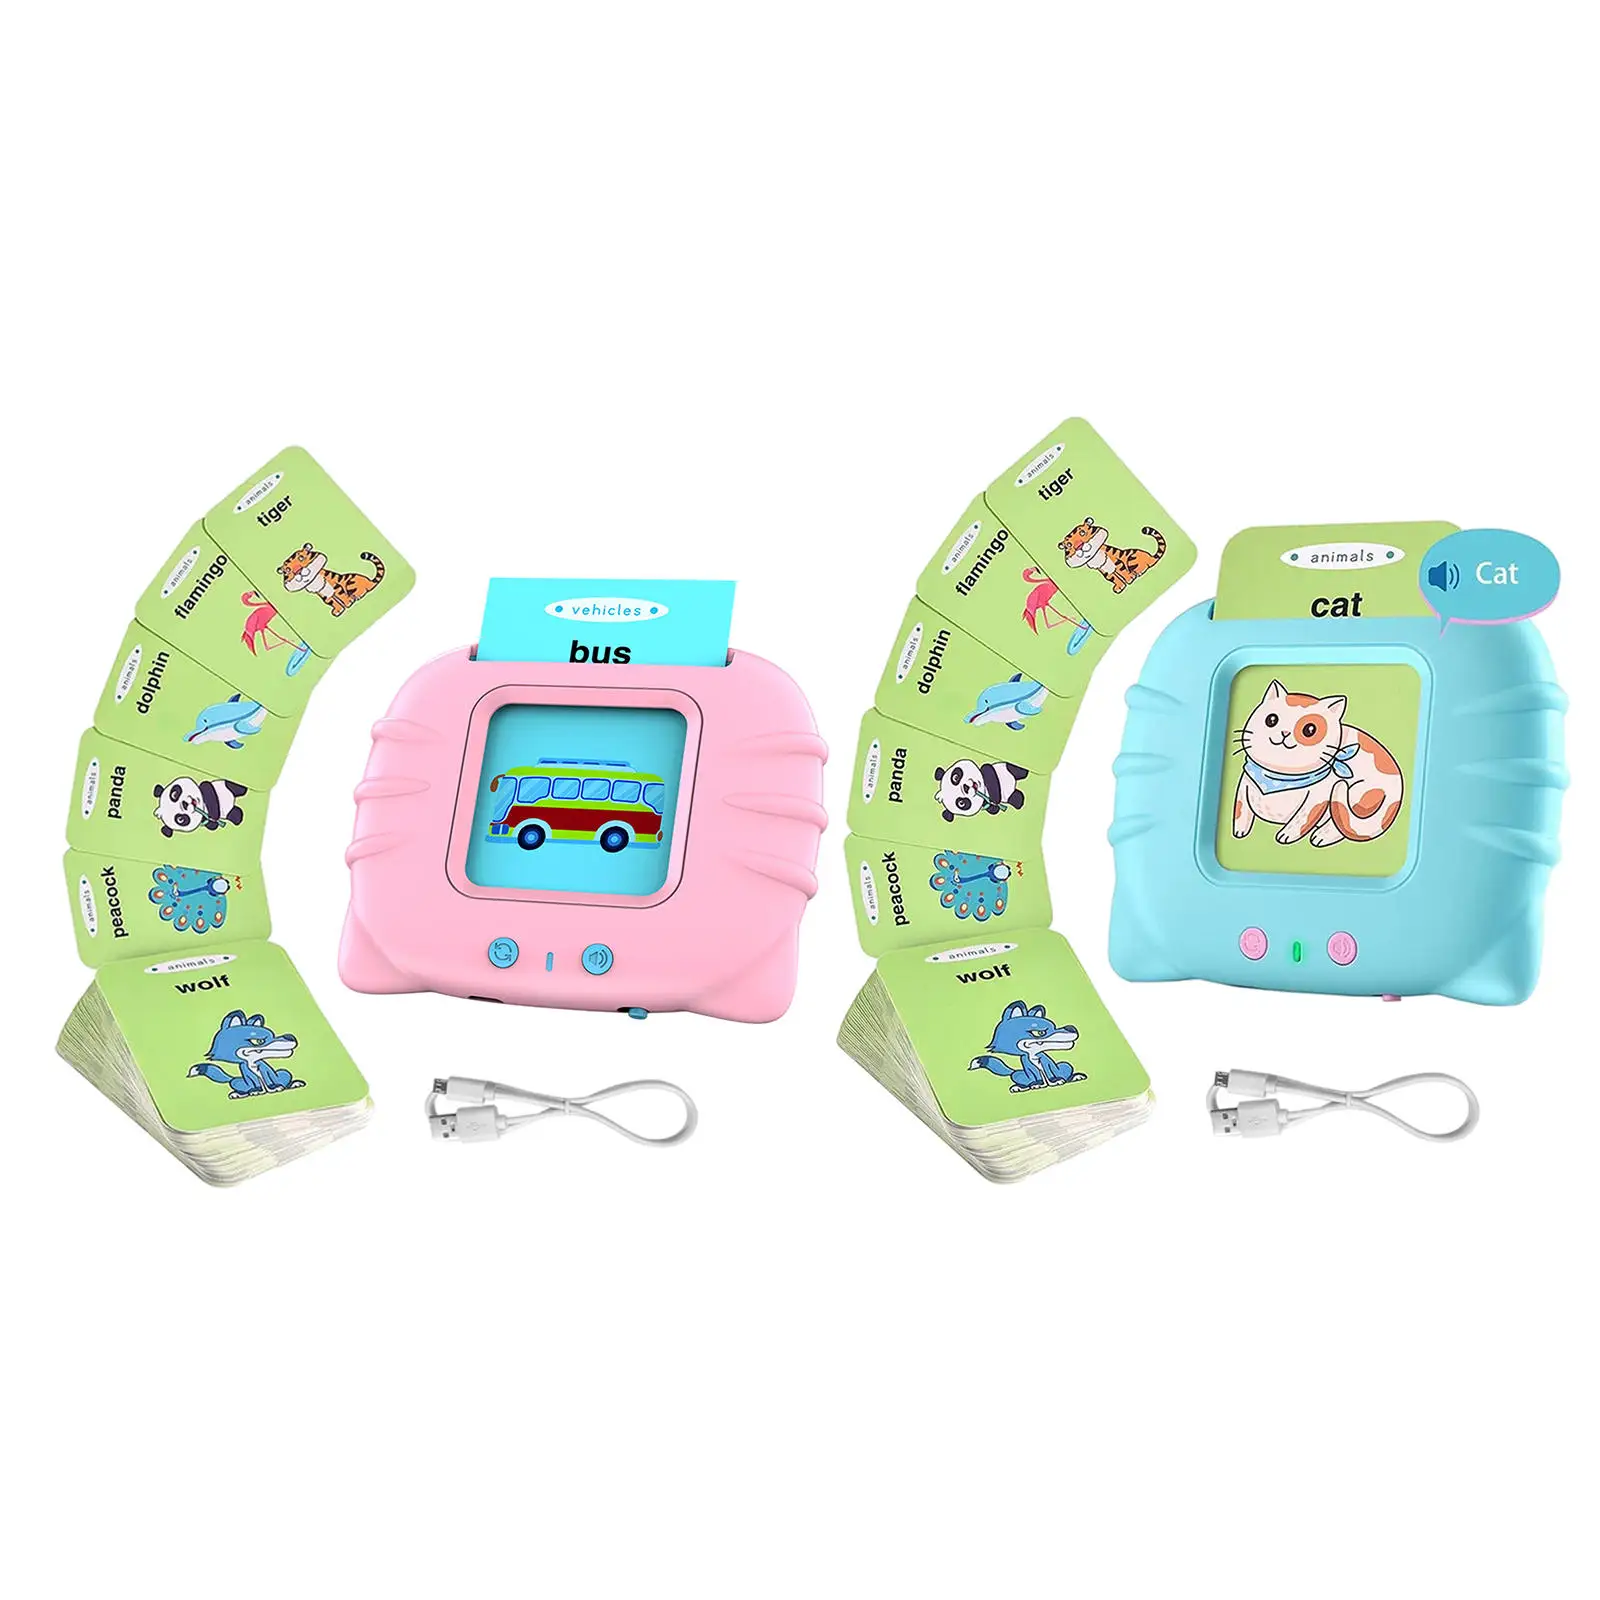 224Pcs Flash Cards Learning Machine Musical Educational Electronic Toy Interactive Toys with Sound Effects Audible for Age 2-6